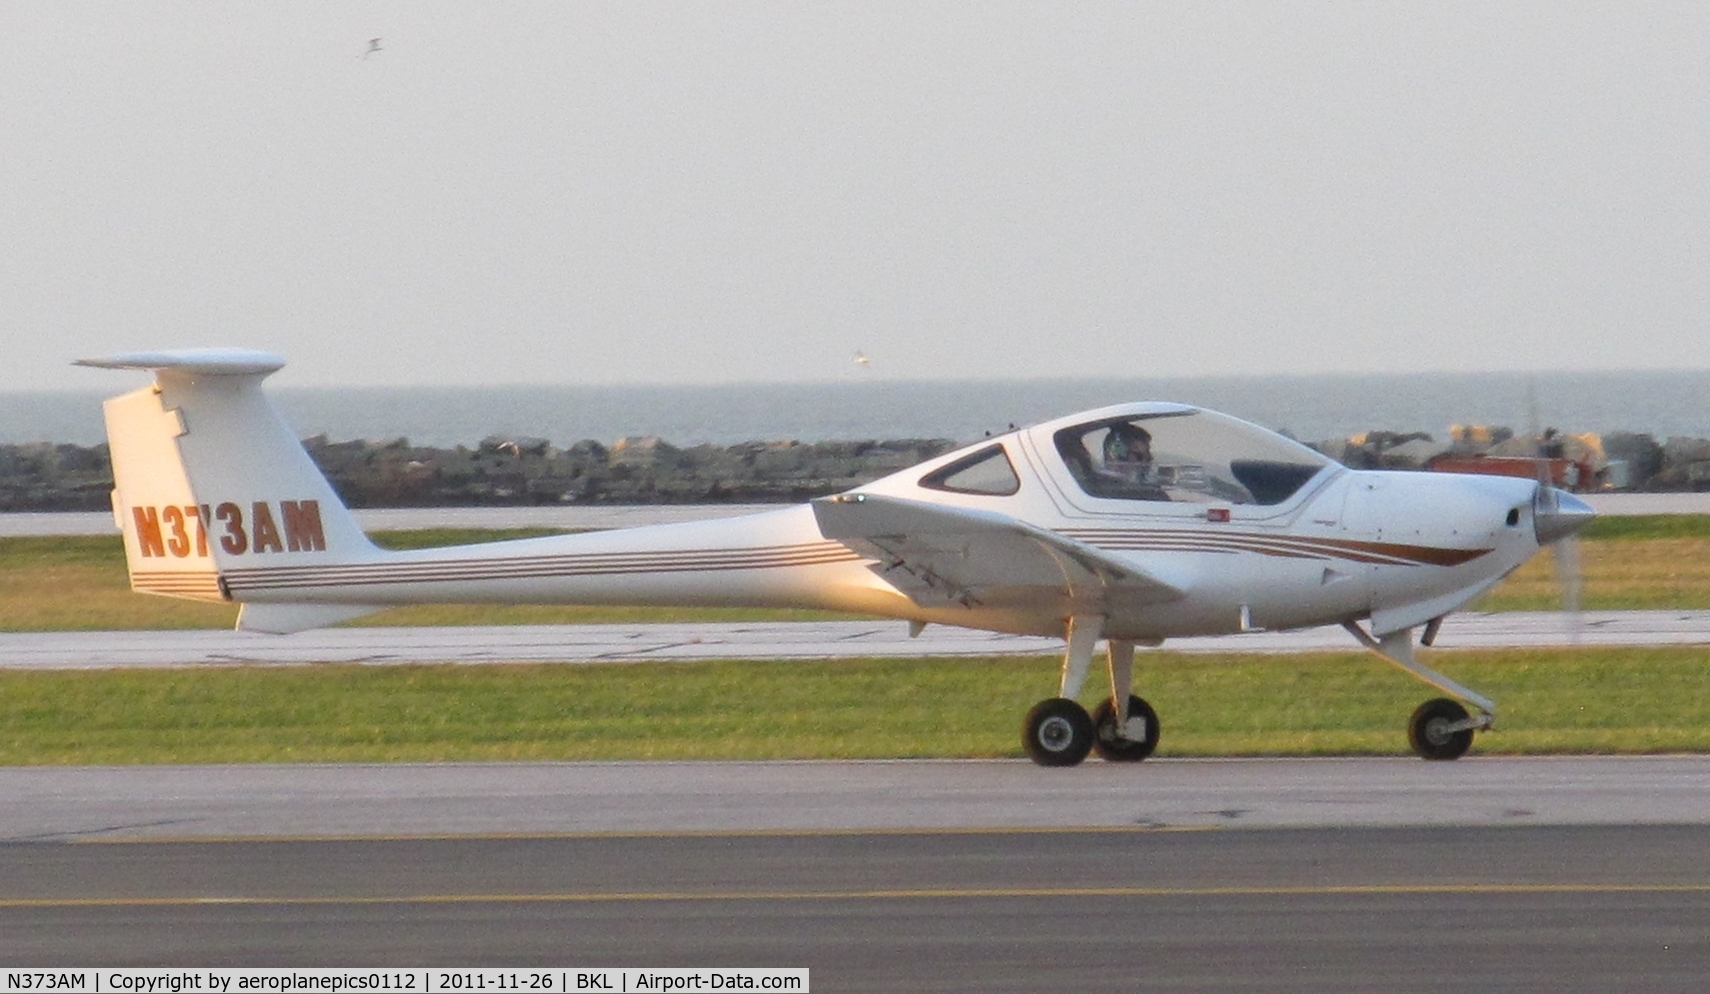 N373AM, 2006 Diamond DA-20C-1 Eclipse C/N C0379, See taxiing to runway 6L for take-off at KBKL.